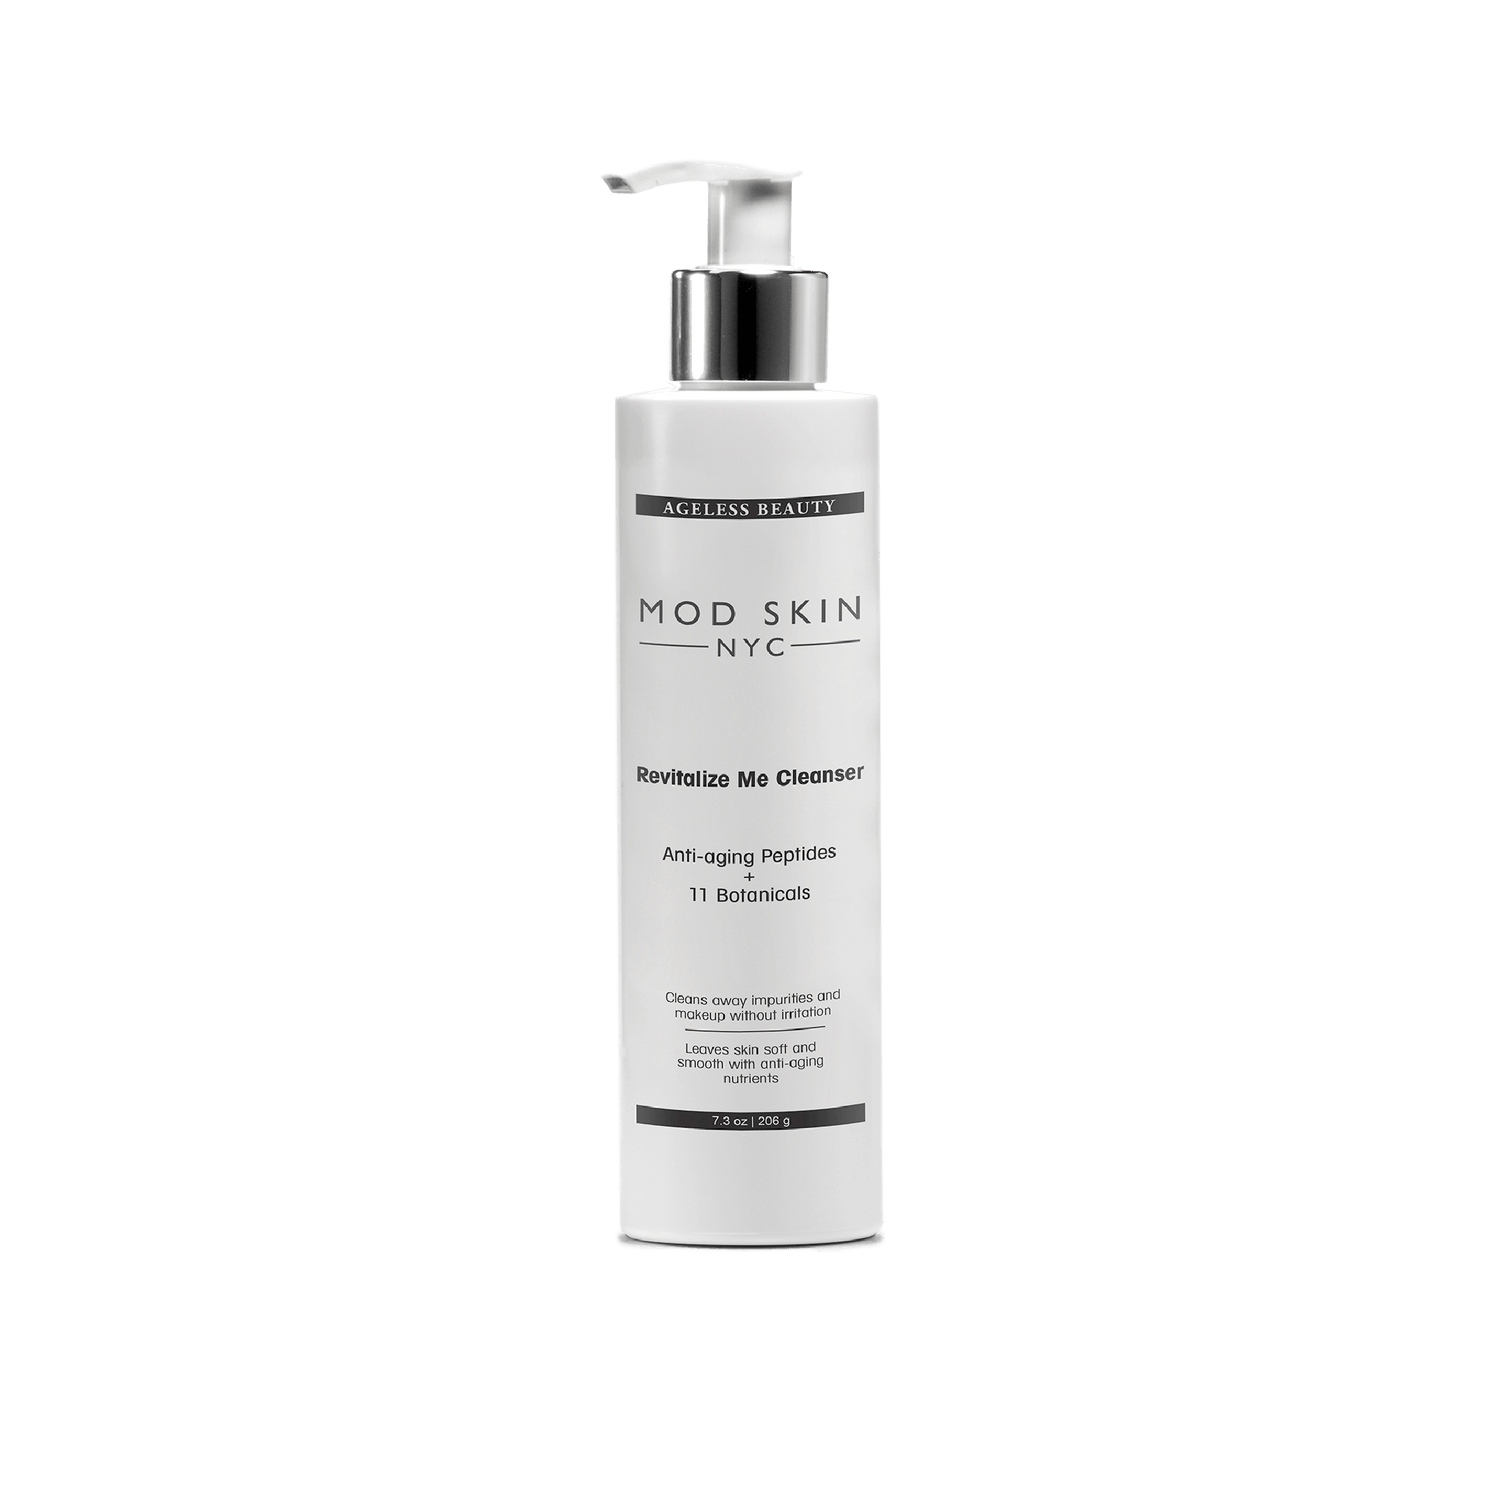 MOD SKIN NYC Revitalize Me Cleanser (206 g / 7.3 oz) - The DLG Store